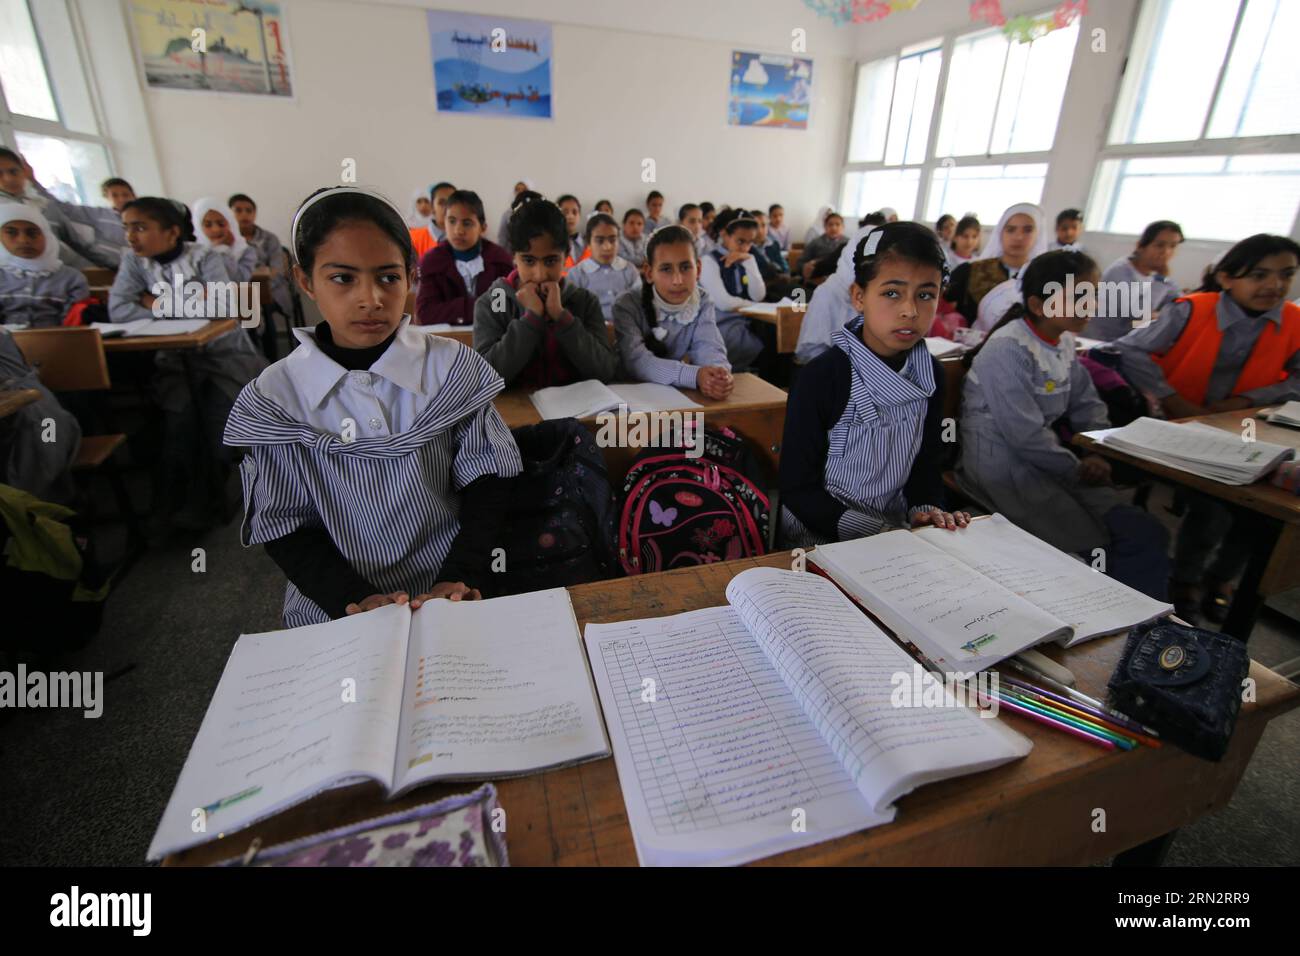 (150322) -- GAZA, March 22, 2015 -- Palestinian students attend a lesson at a UN-run school which is reopened after it was damaged during the war between Israel and Hamas militants in Khuzaa village of the southern Gaza Strip city of Khan Yunis, on March 22, 2015. ) MIDEAST-GAZA-REOPEN-SCHOOL KhaledxOmar PUBLICATIONxNOTxINxCHN   Gaza March 22 2015 PALESTINIAN Students attend a Lesson AT a UN Run School Which IS reopened After IT what damaged during The was between Israel and Hamas militant in  Village of The Southern Gaza Strip City of Khan Yunis ON March 22 2015 Mideast Gaza reopen School  PU Stock Photo